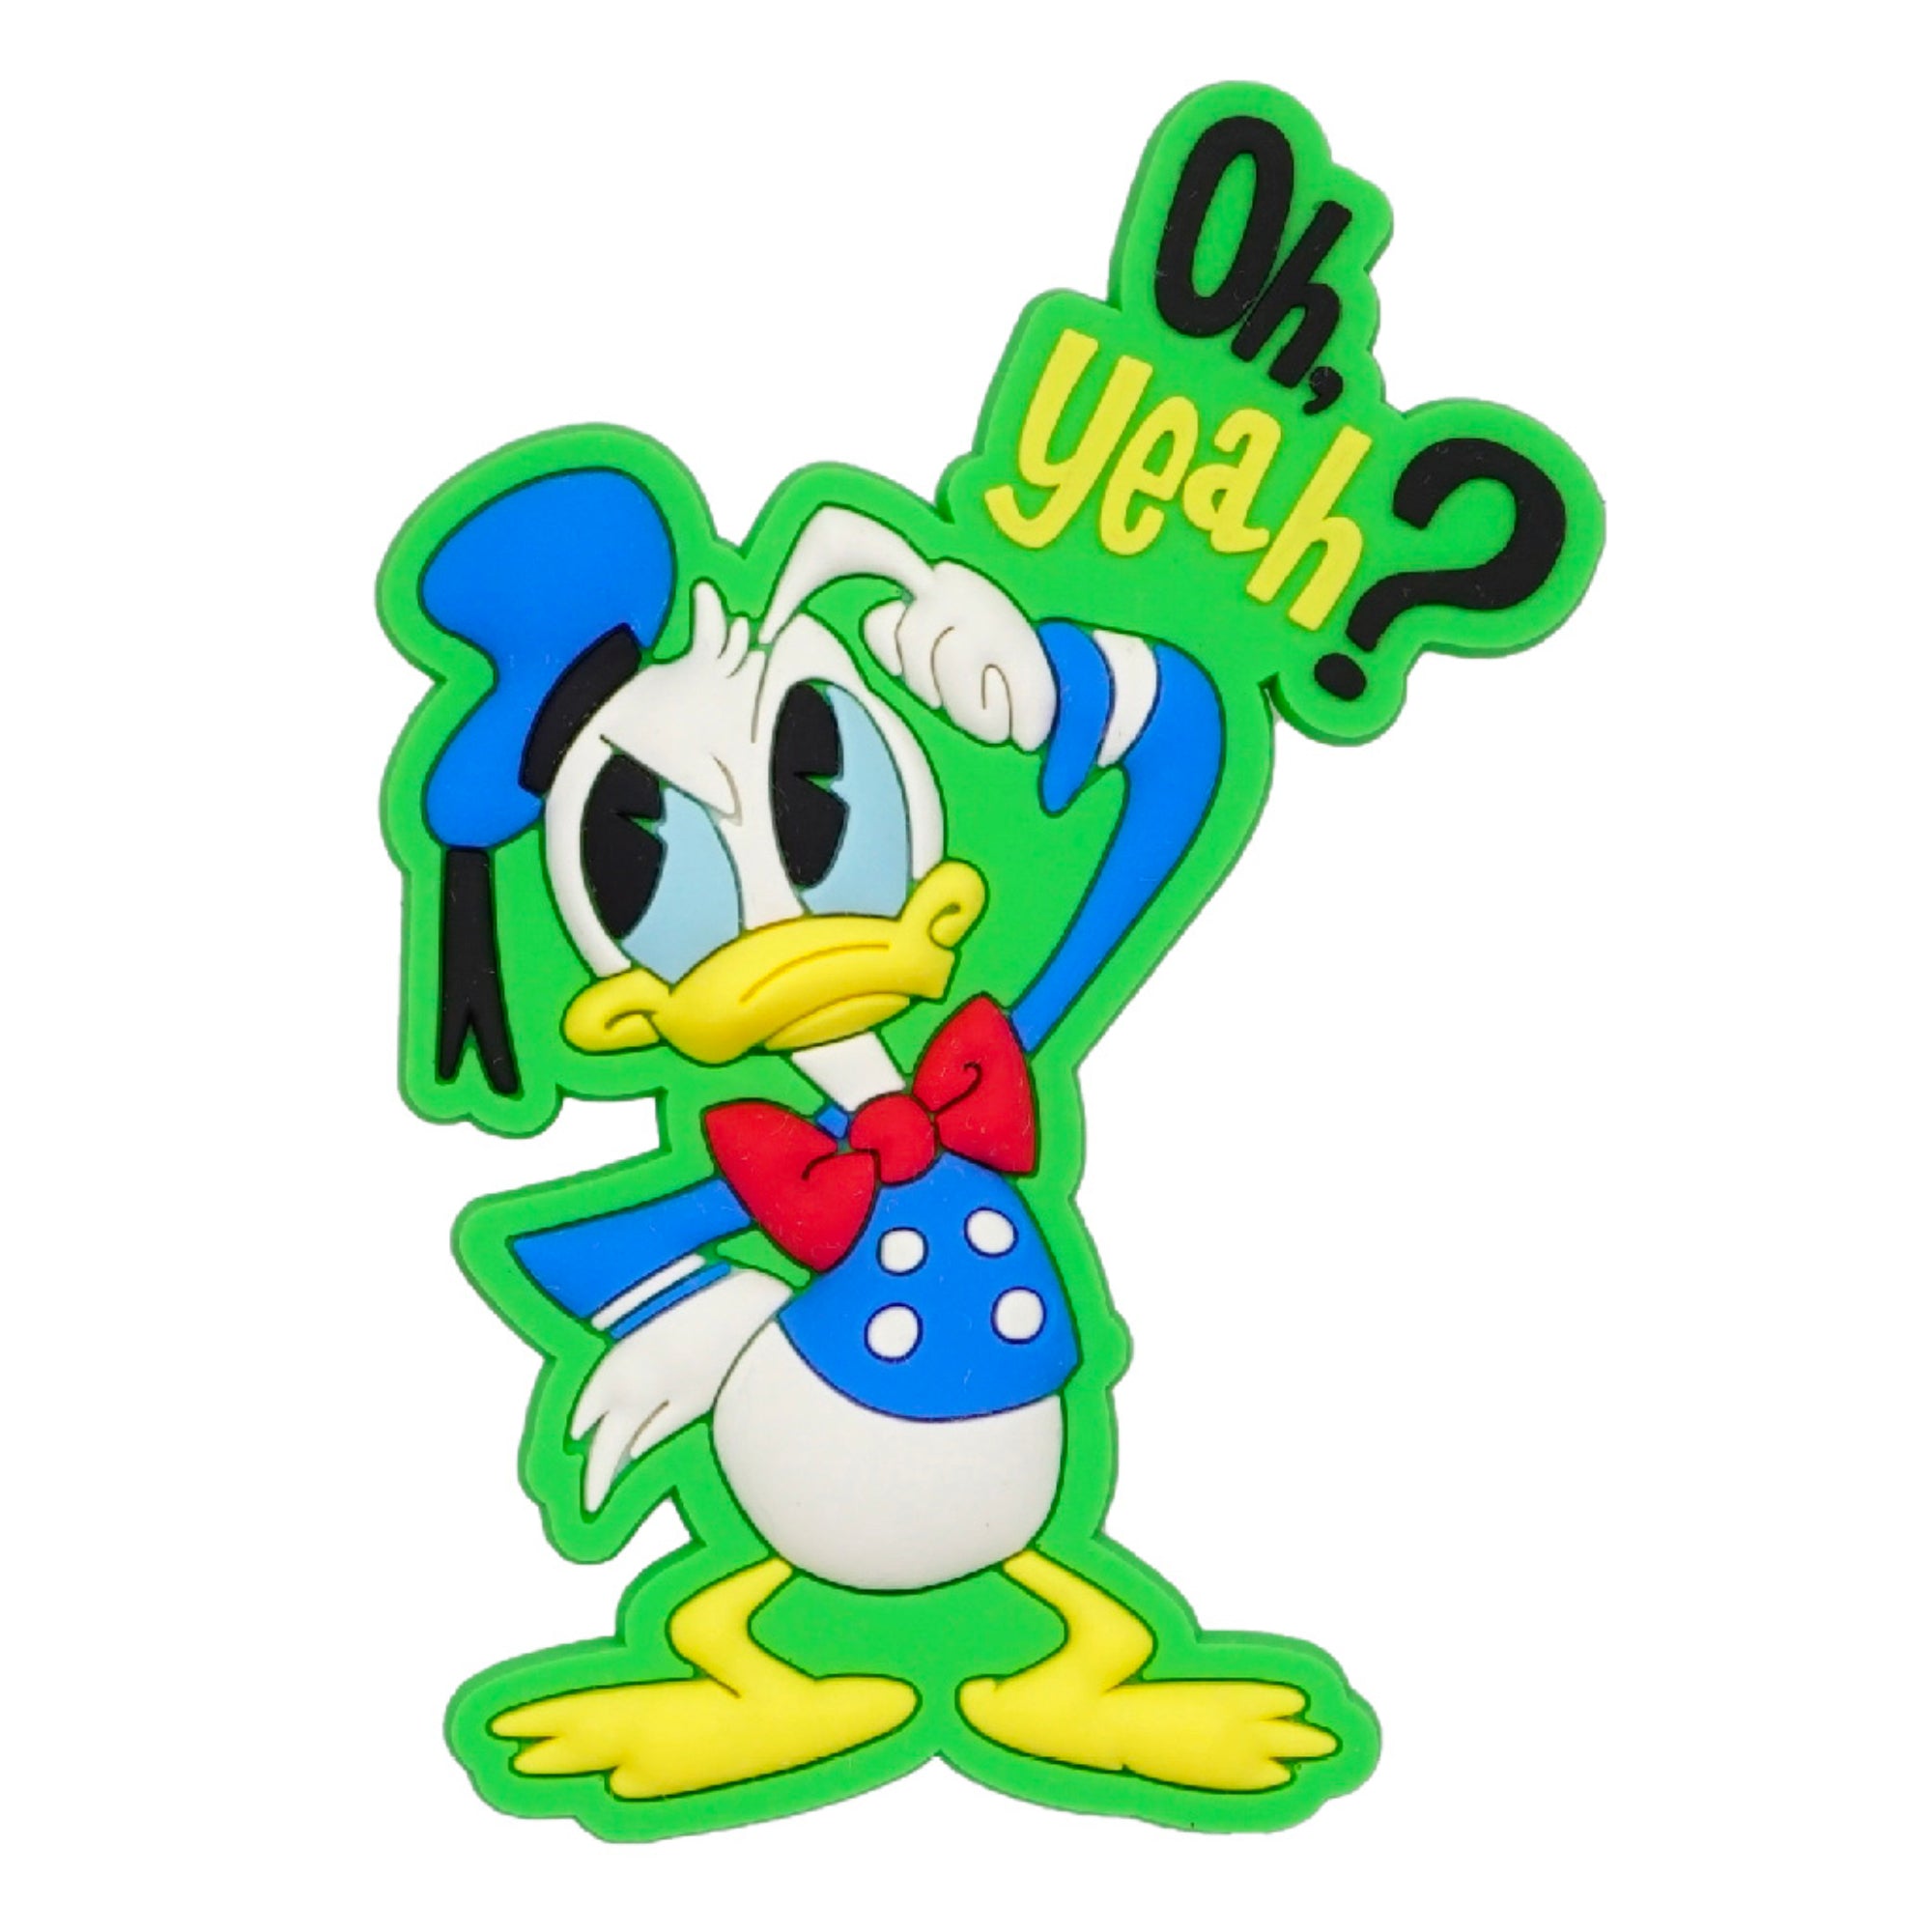 Donald "Oh Yeah?" – Soft Touch PVC Magnet